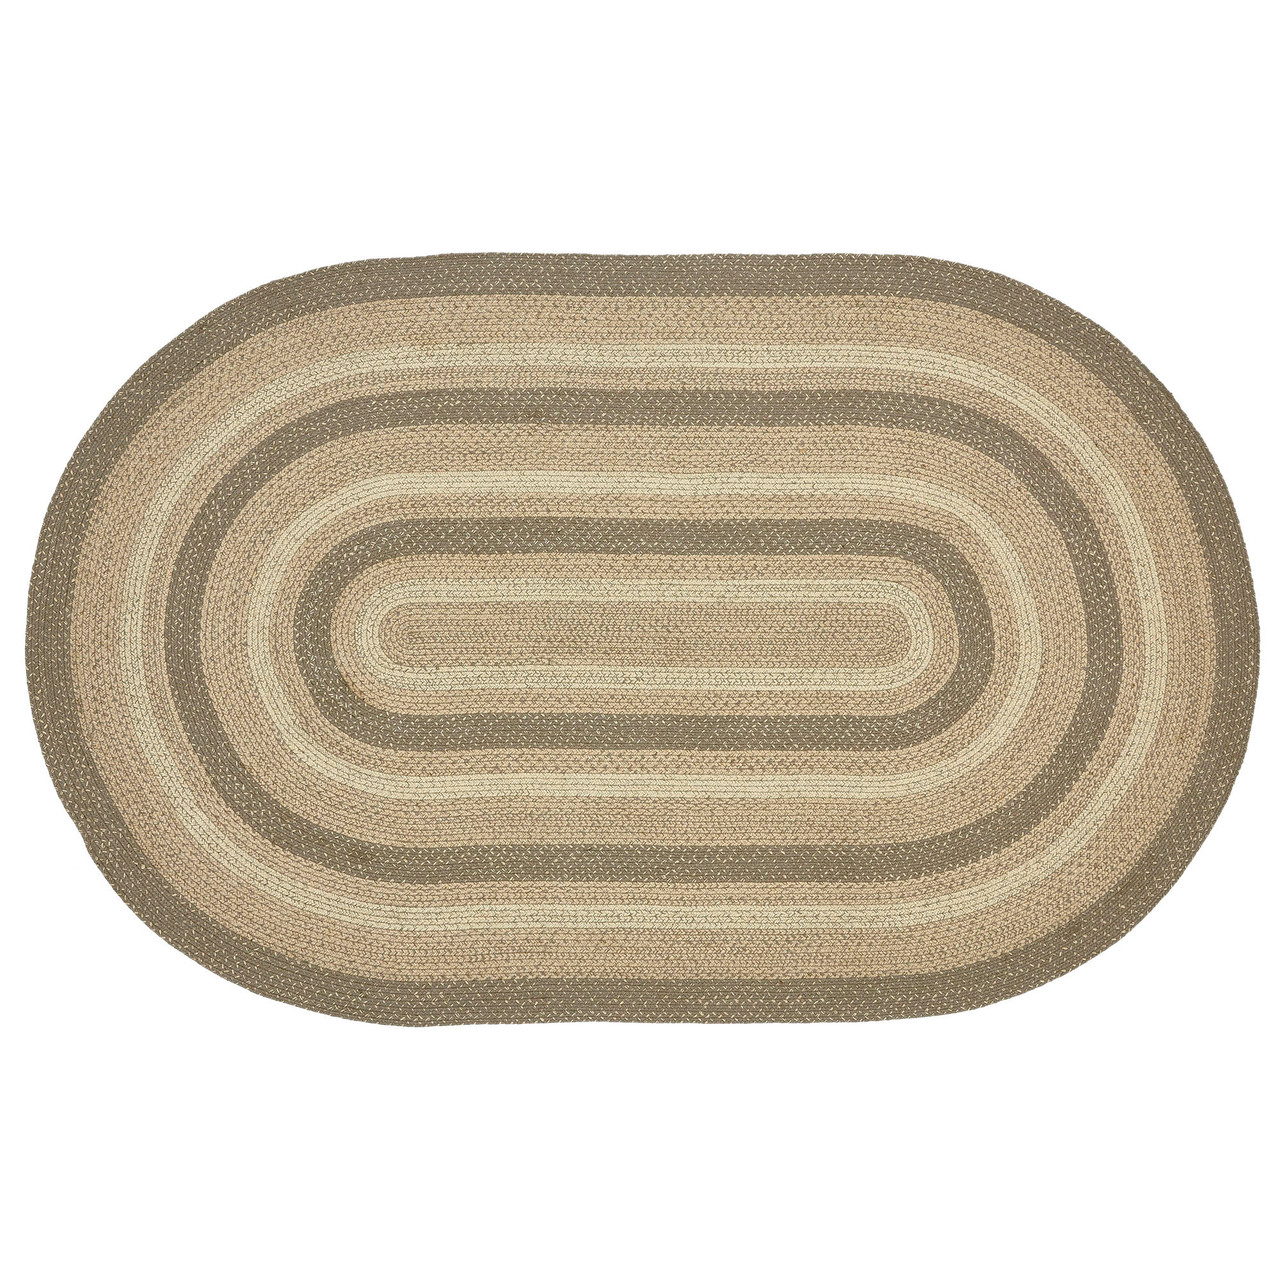 Ginger Spice Jute Braided Rug Oval with Rug Pad 4'x6' VHC Brands